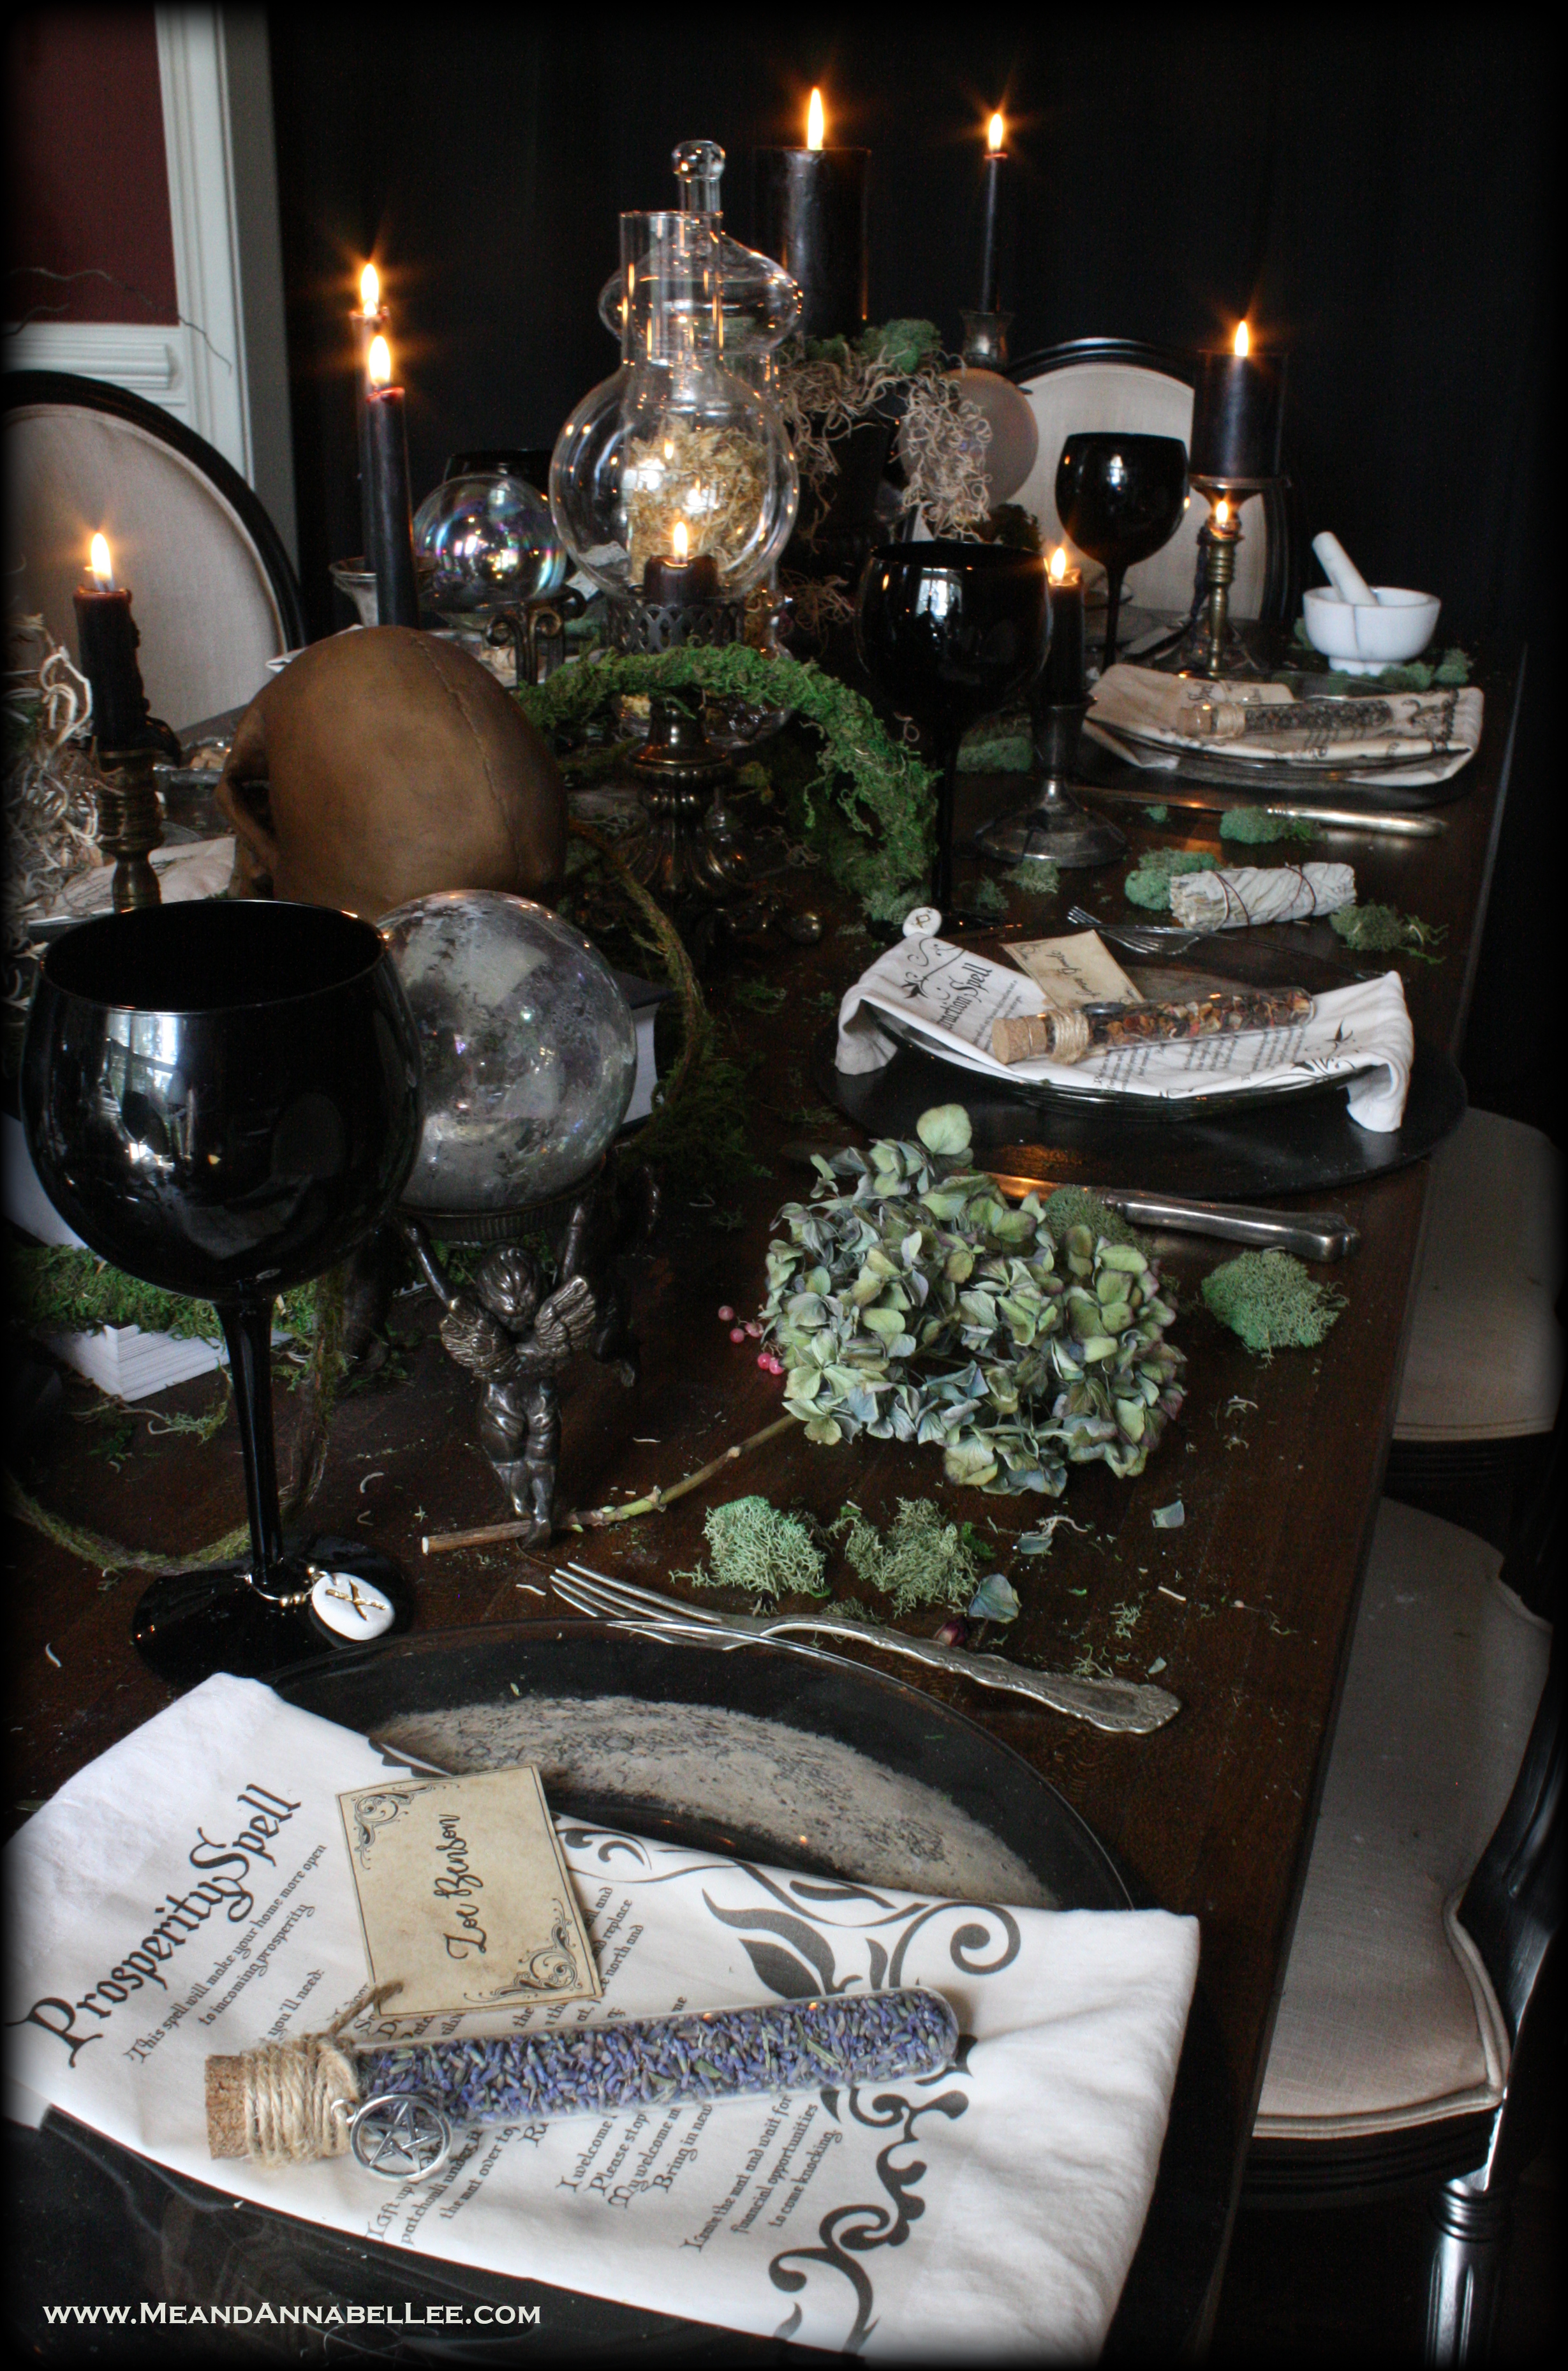 Witches Dinner Party | Dried Floral Stems | Elegant Halloween Table Setting | Gothic Décor | Moon Phase Charger Plates | DIY Spell Napkins | Loose Leaf Tea Apothecary Vials | Rune Stone Wine Charms | www.MeandAnnabelLee.com